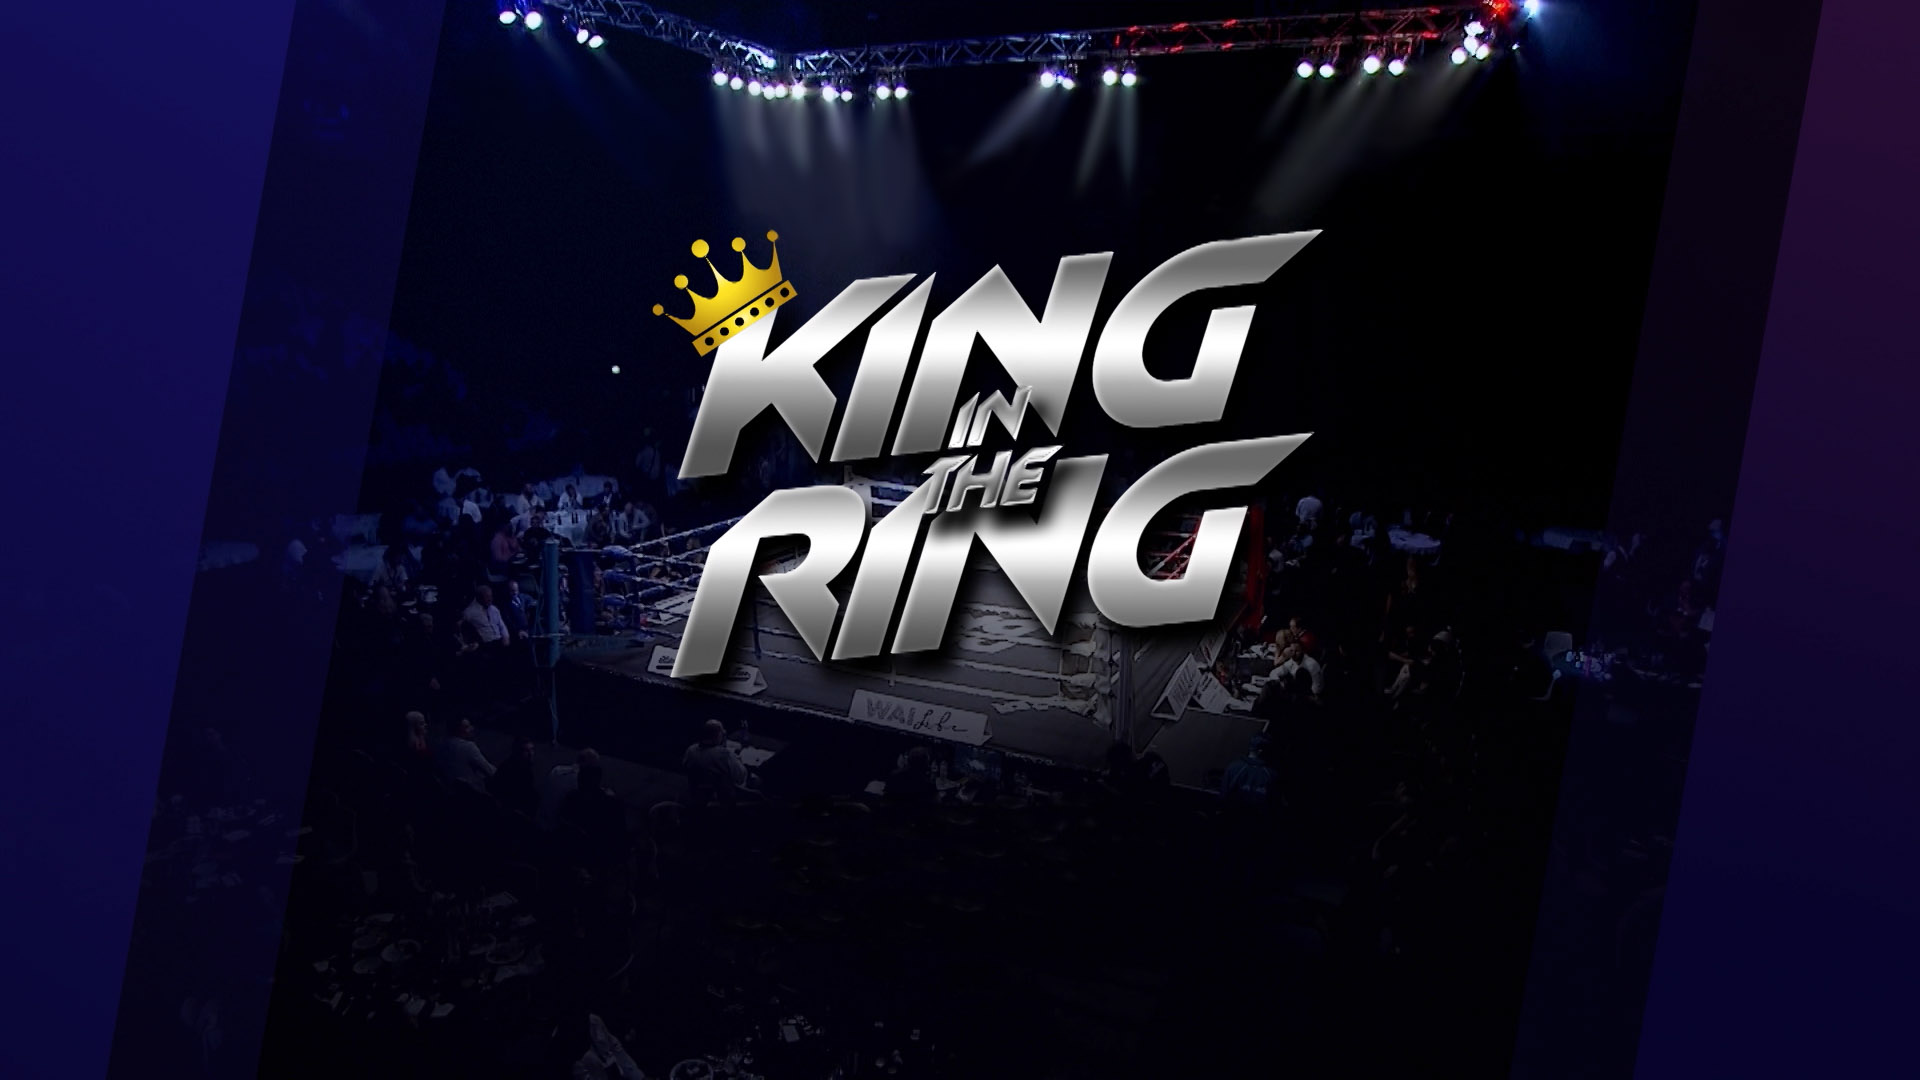 King in the Ring 8 Man Series - Photo by Calden Scott Jamieson | Facebook